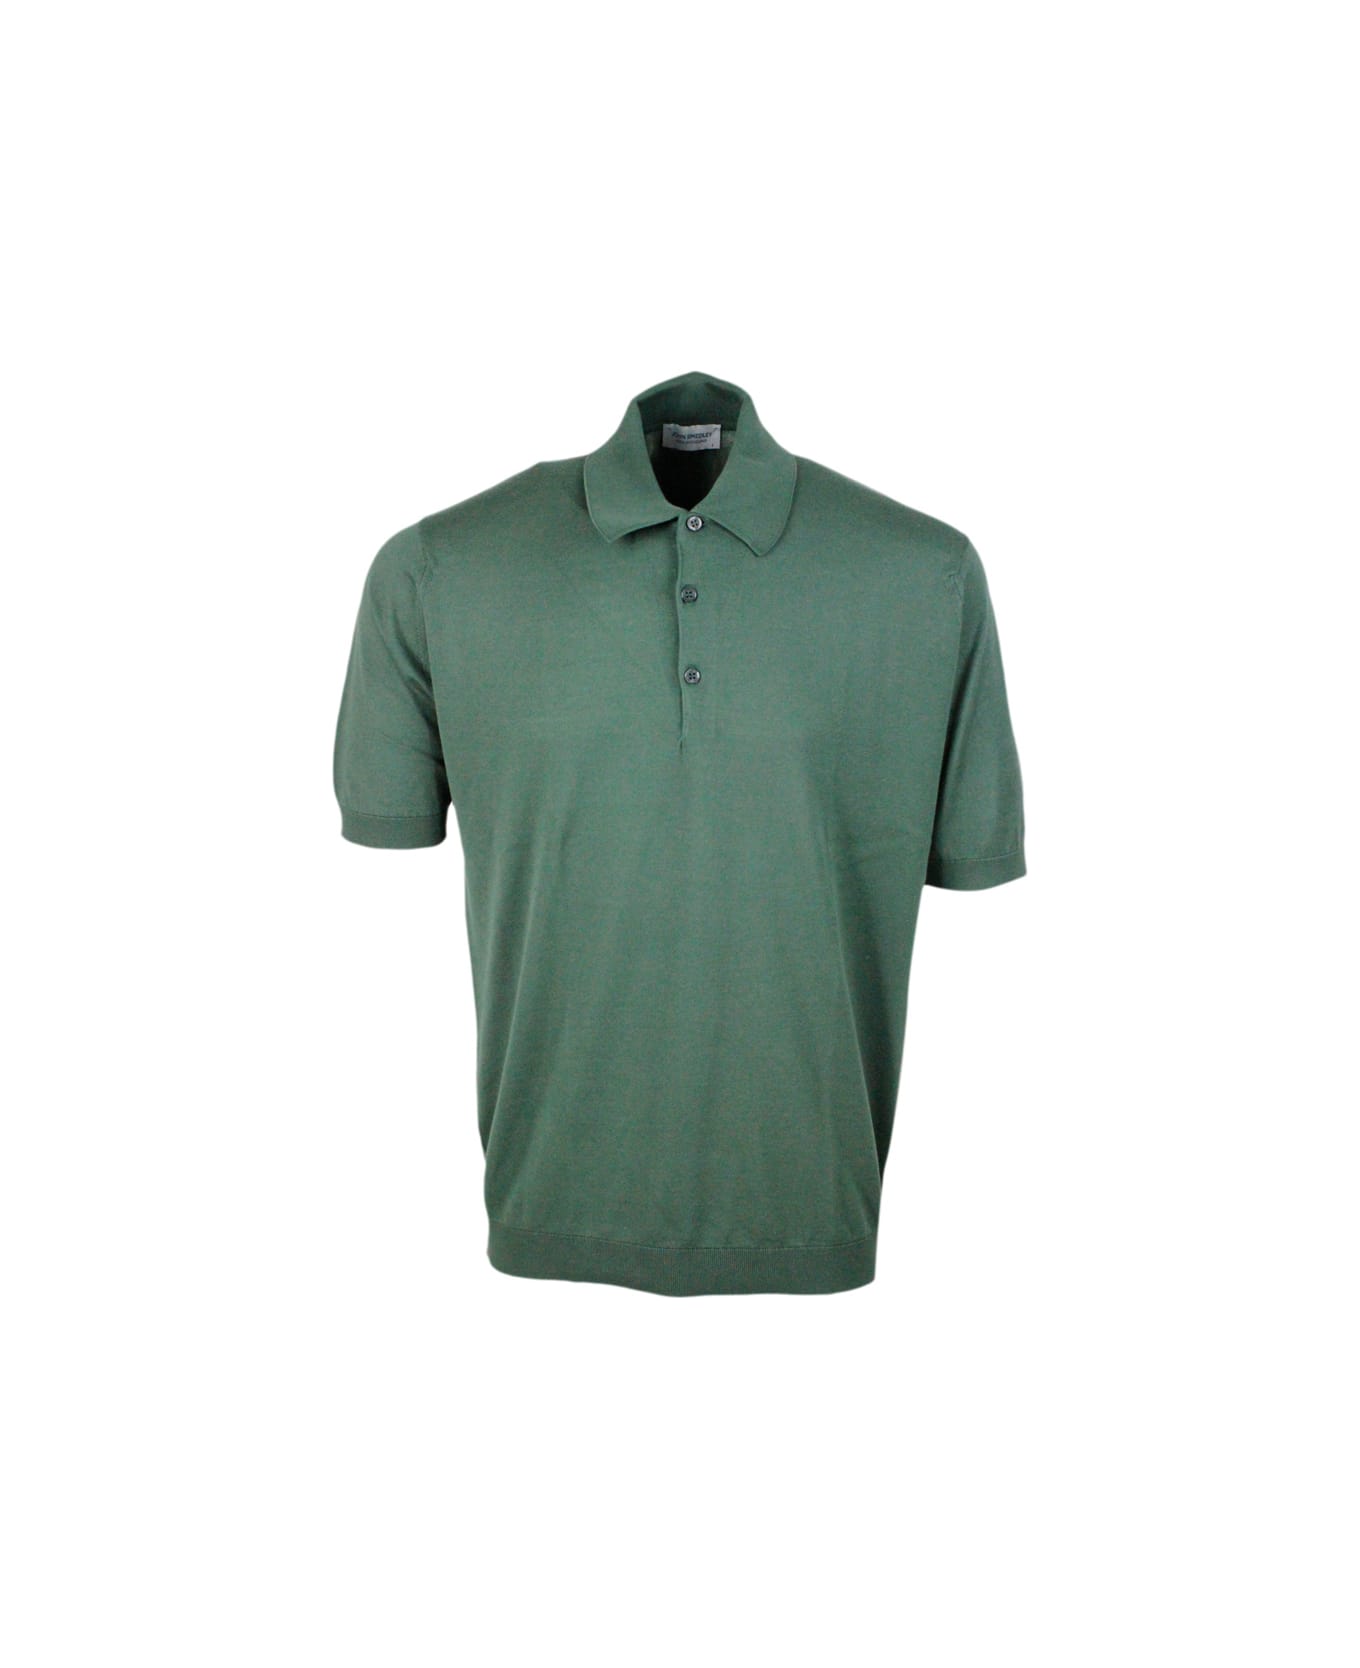 John Smedley Short-sleeved Polo Shirt In Extra-fine Cotton Thread With Three Buttons - Green ポロシャツ